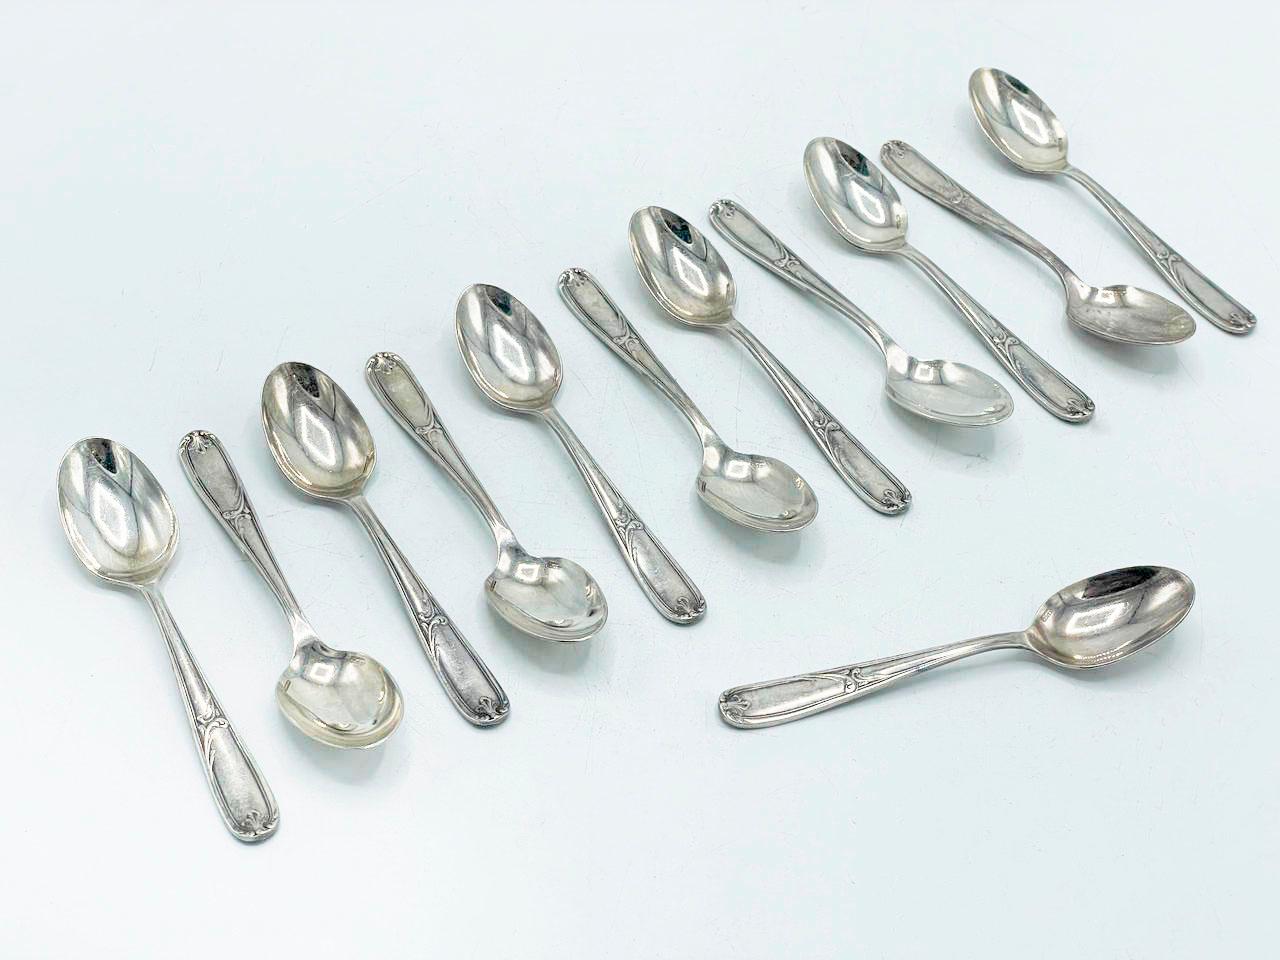 Christofle Made in Argentina, Flatware art nouveau in Silverplated For Sale 10